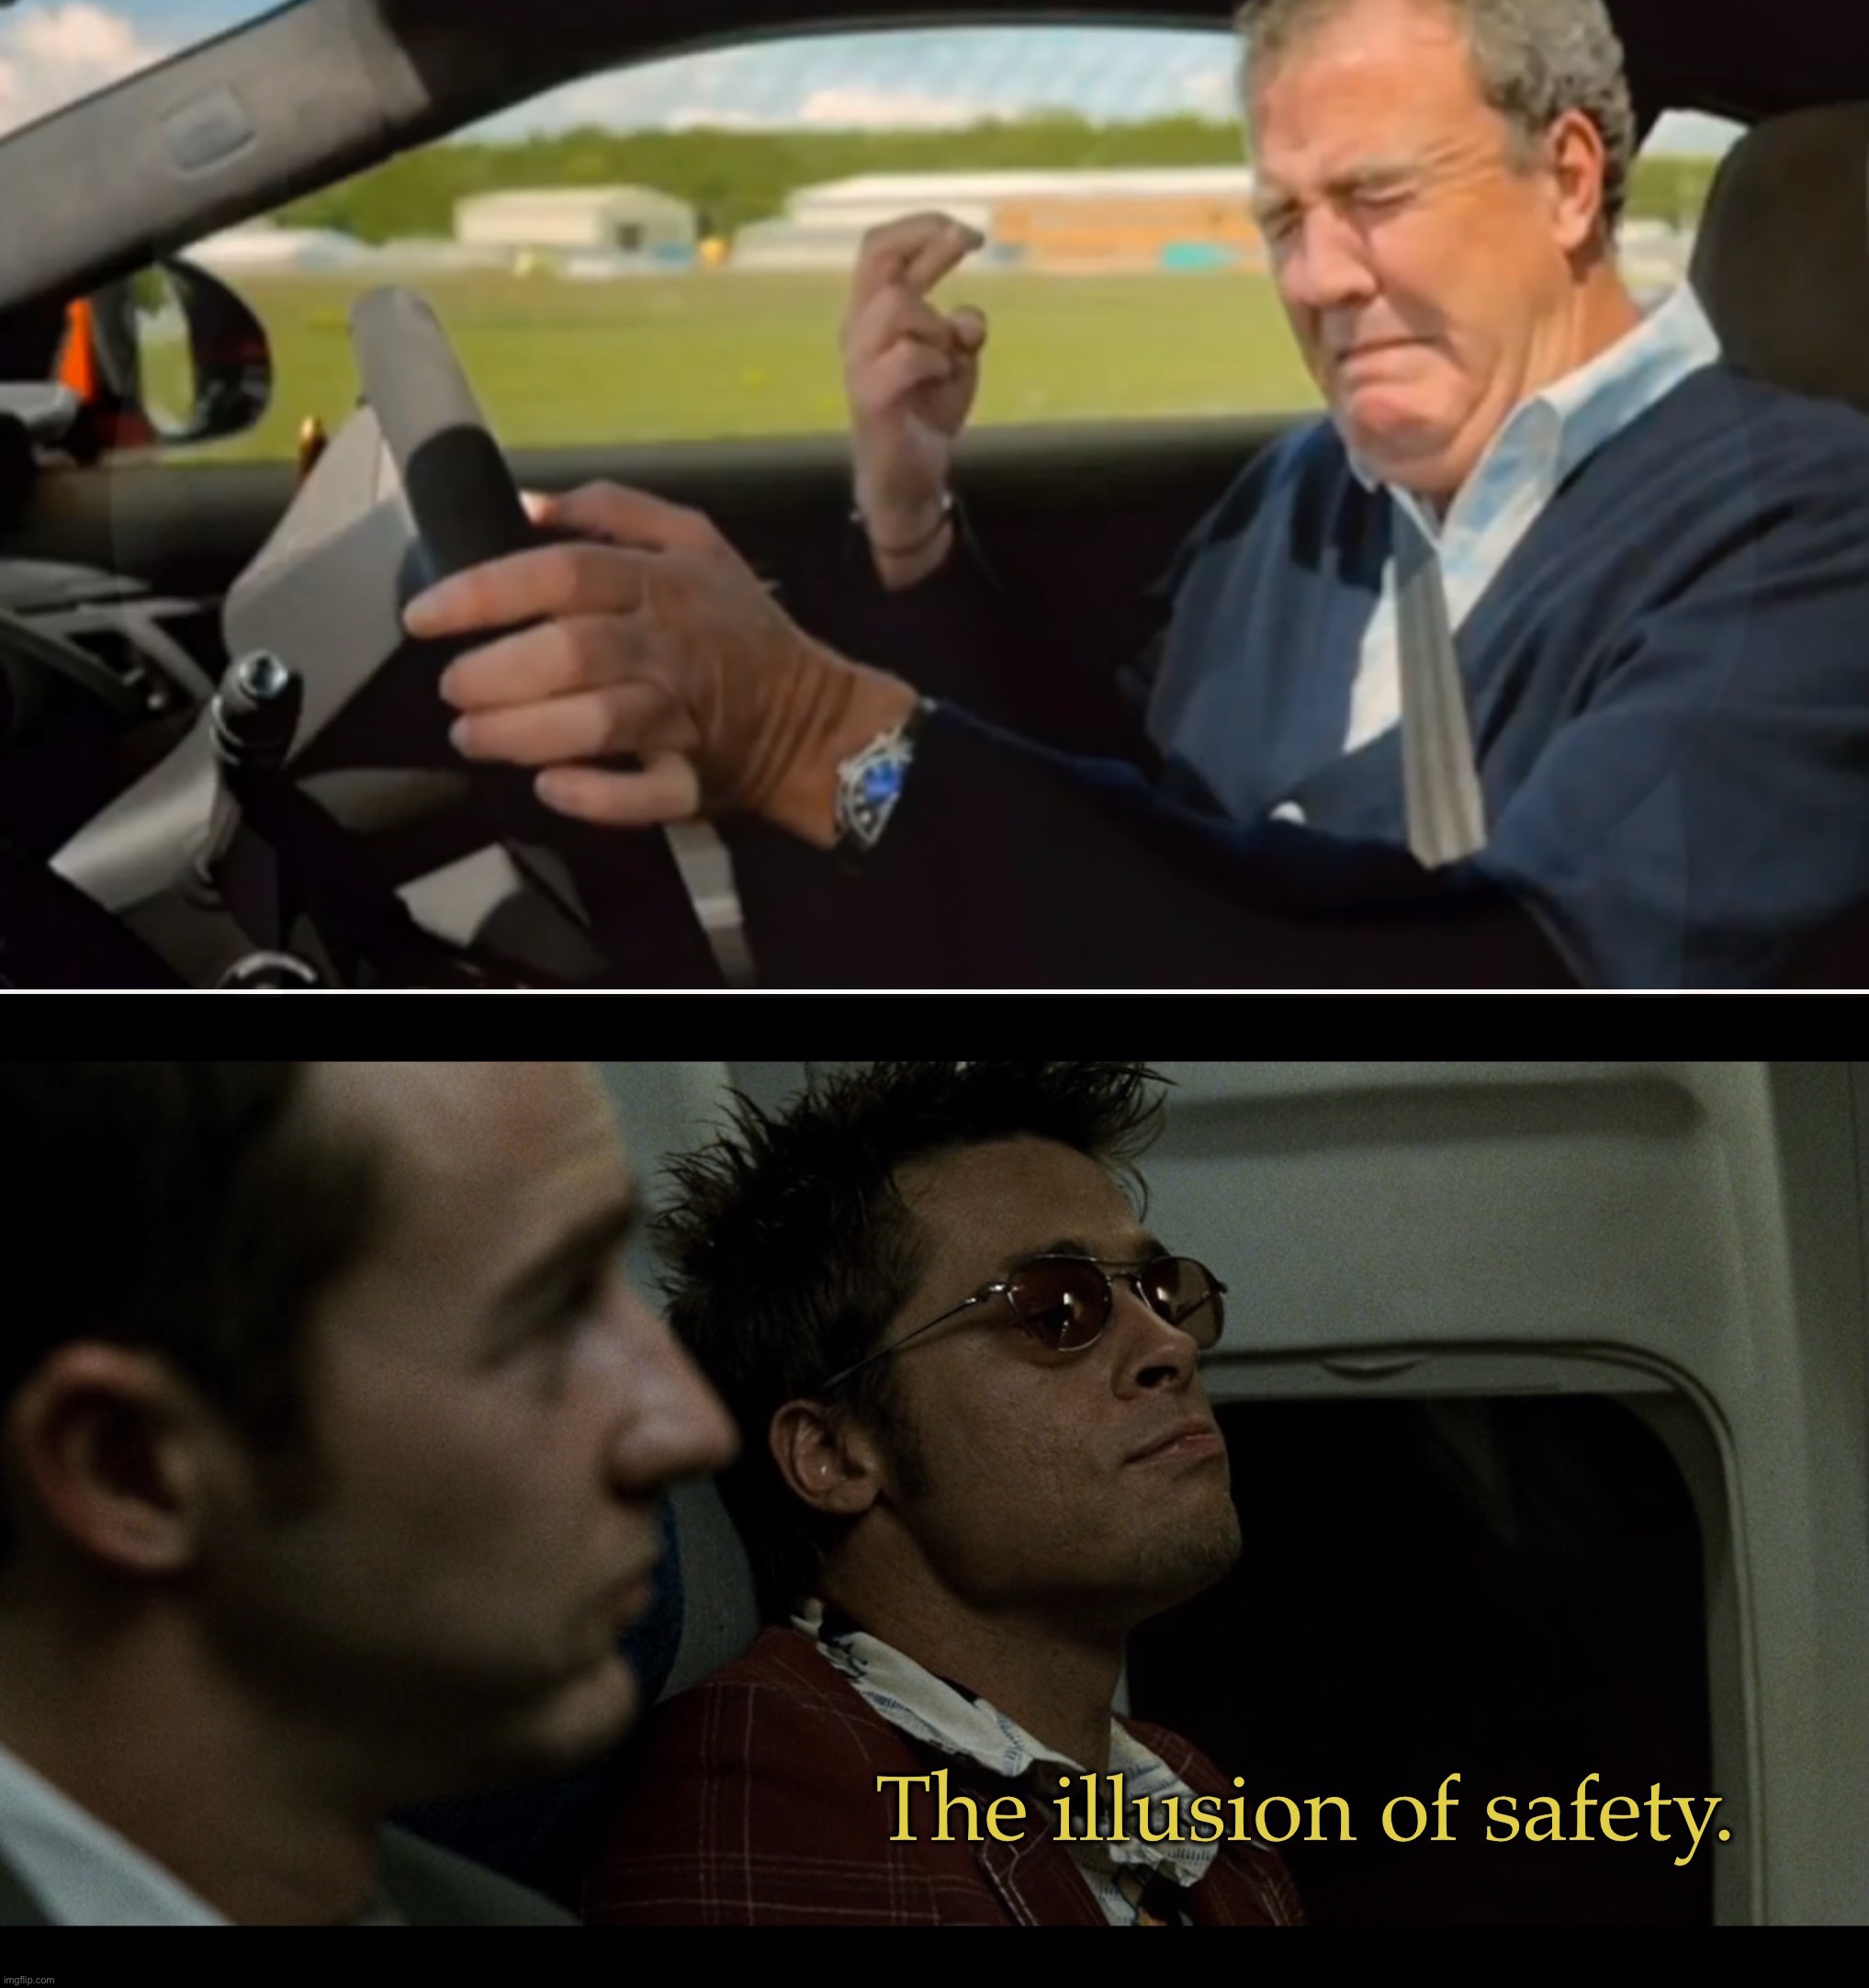 Religious people be like: | ALL RELIGIOUS PEOPLE BE LIKE | image tagged in the illusion of safety,top gear,jeremy clarkson,driving,praying,fun | made w/ Imgflip meme maker